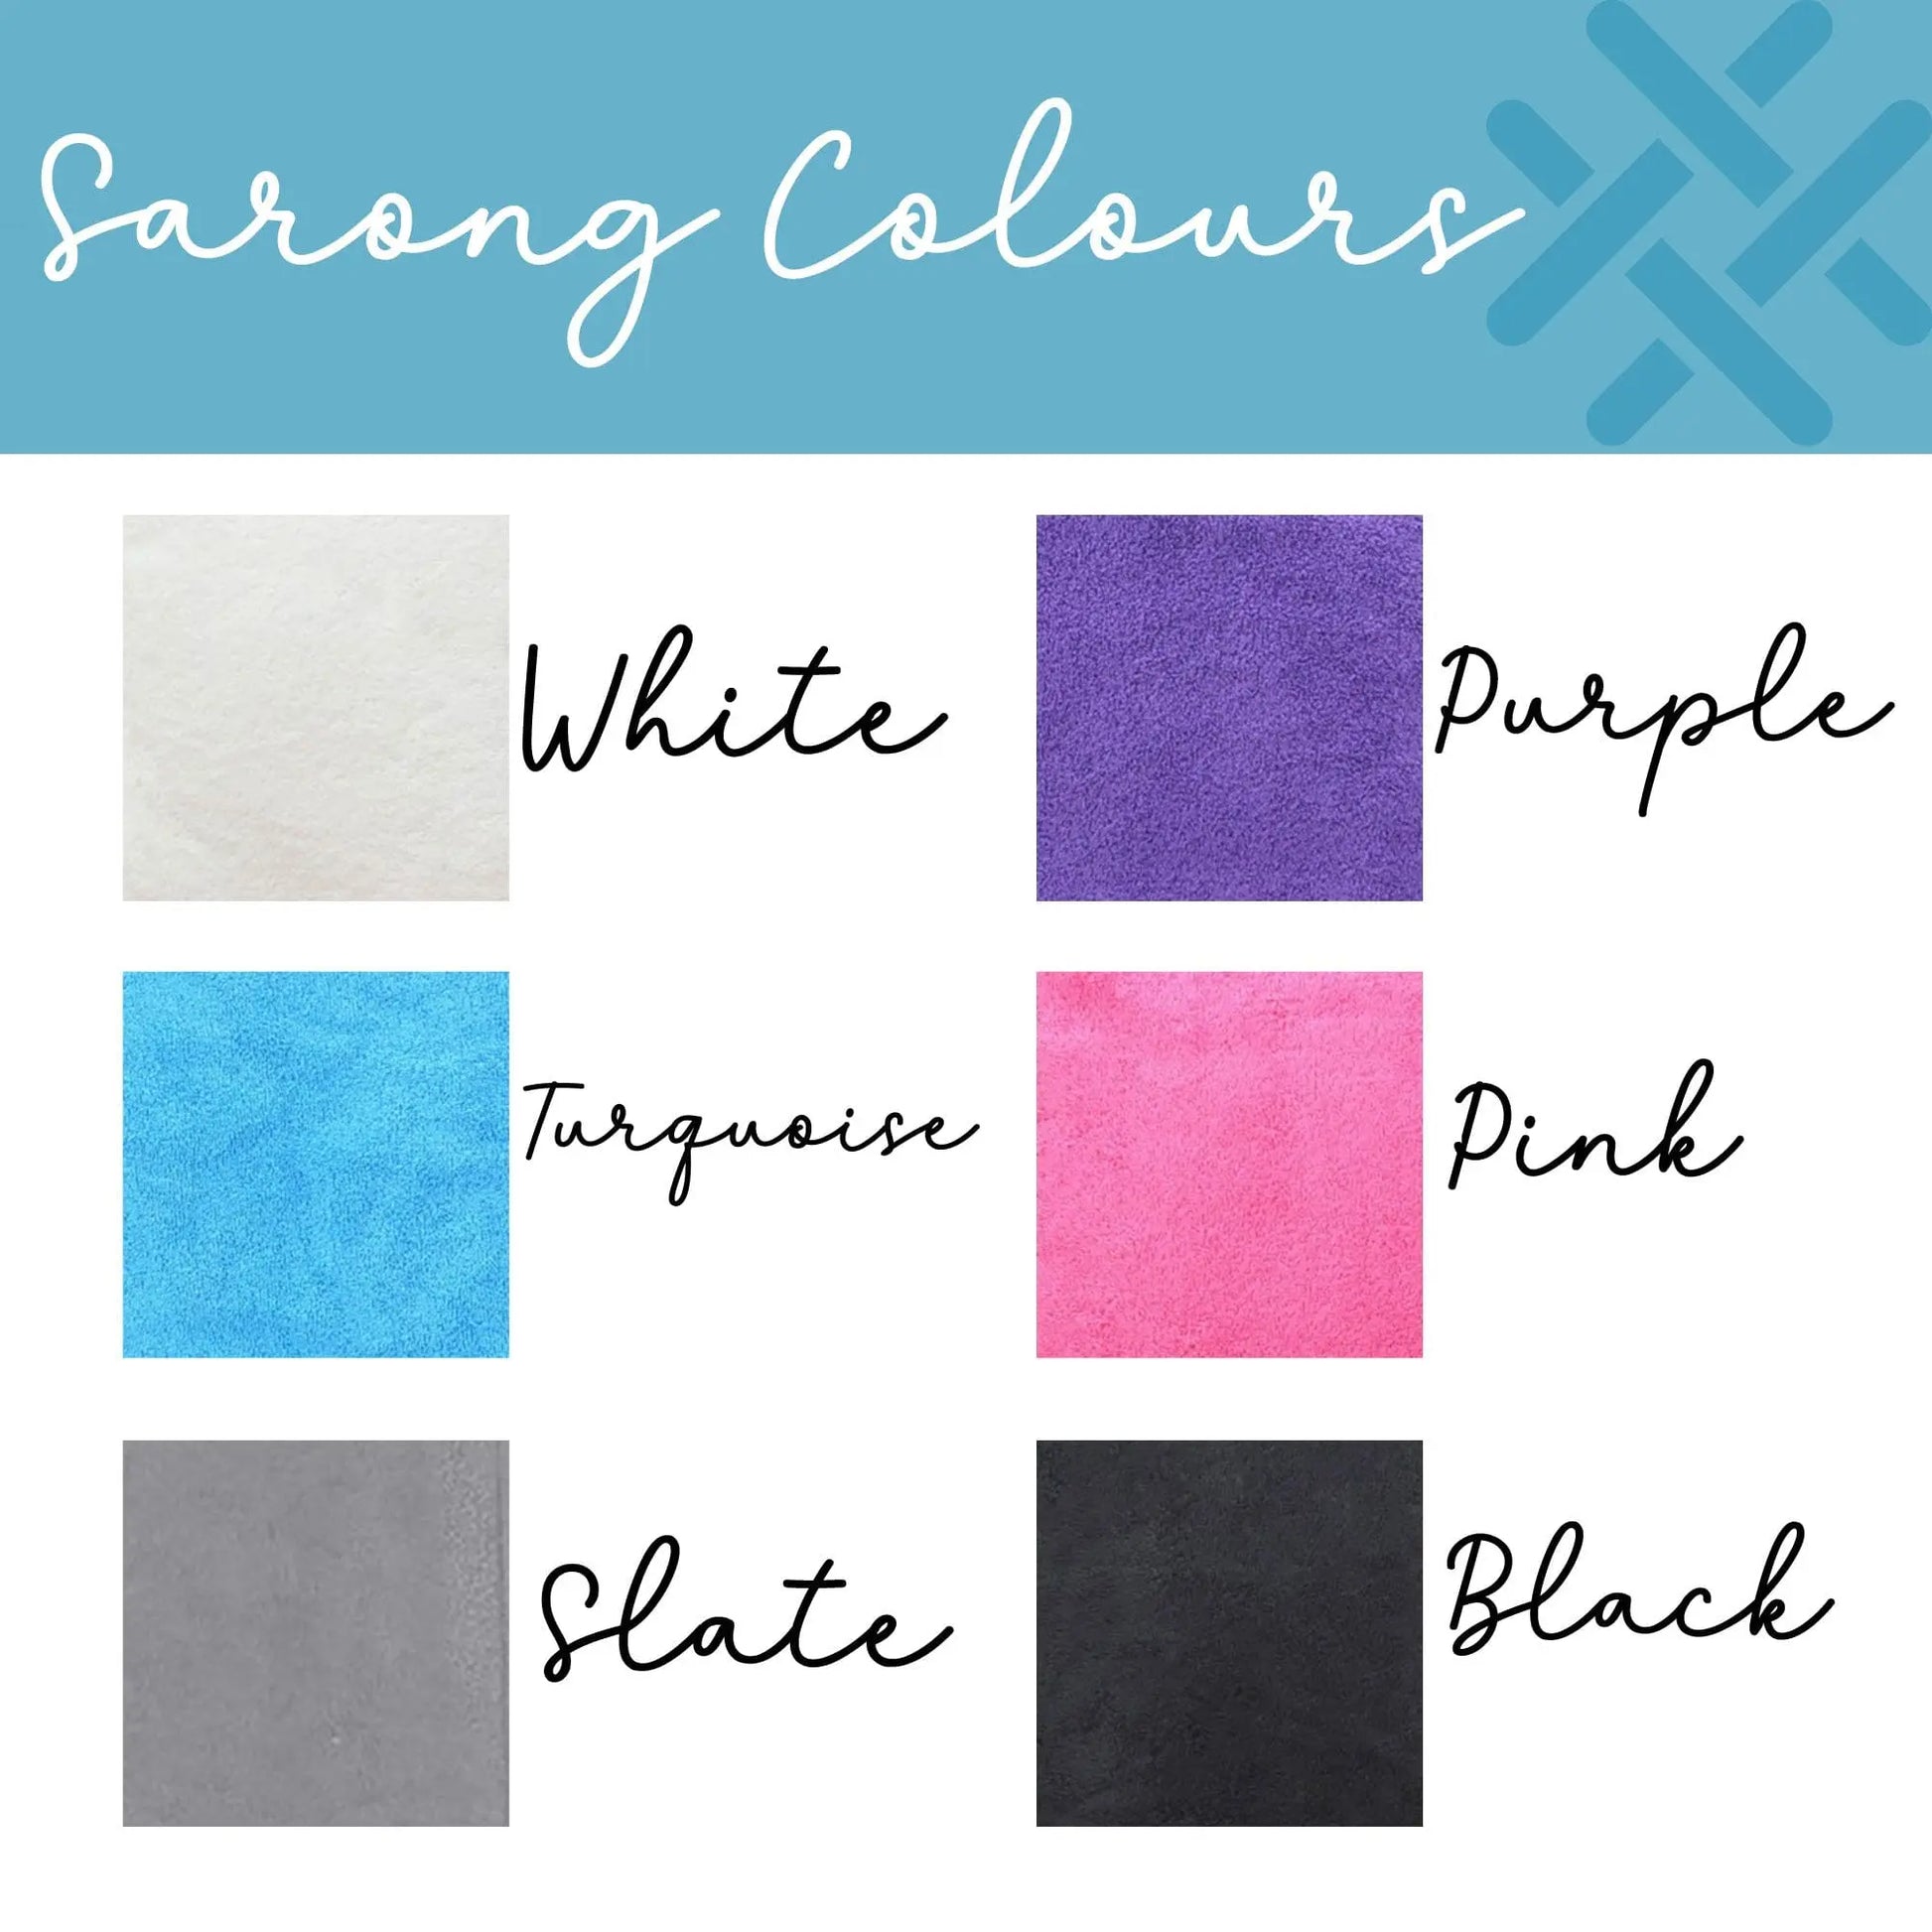 infographic of colour range for the sarongs